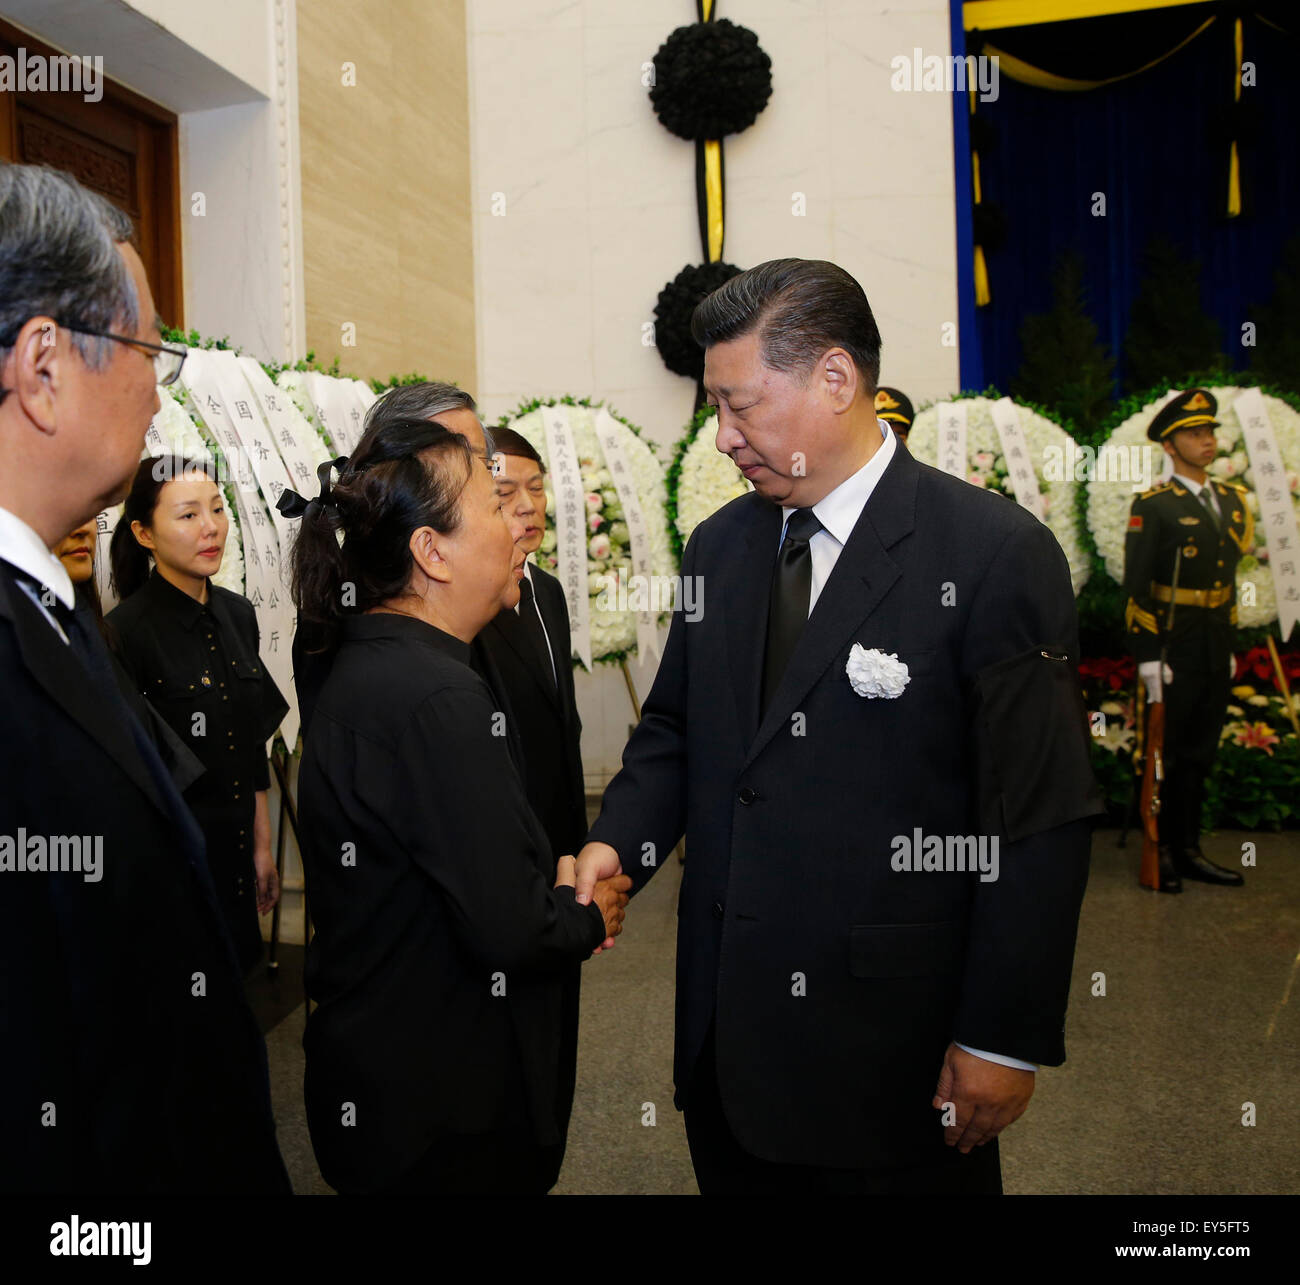 (150722) -- BEIJING, July 22, 2015 (Xinhua) -- Chinese President Xi Jinping (R, front) shakes hands with a family member of Wan Li, former chairman of the National People's Congress (NPC) Standing Committee, during Wan's funeral at Babaoshan Revolutionary Cemetery in Beijing, capital of China, July 22, 2015. The body of Wan Li was cremated on Wednesday morning in Beijing.  (Xinhua/Ju Peng)(mcg) Stock Photo